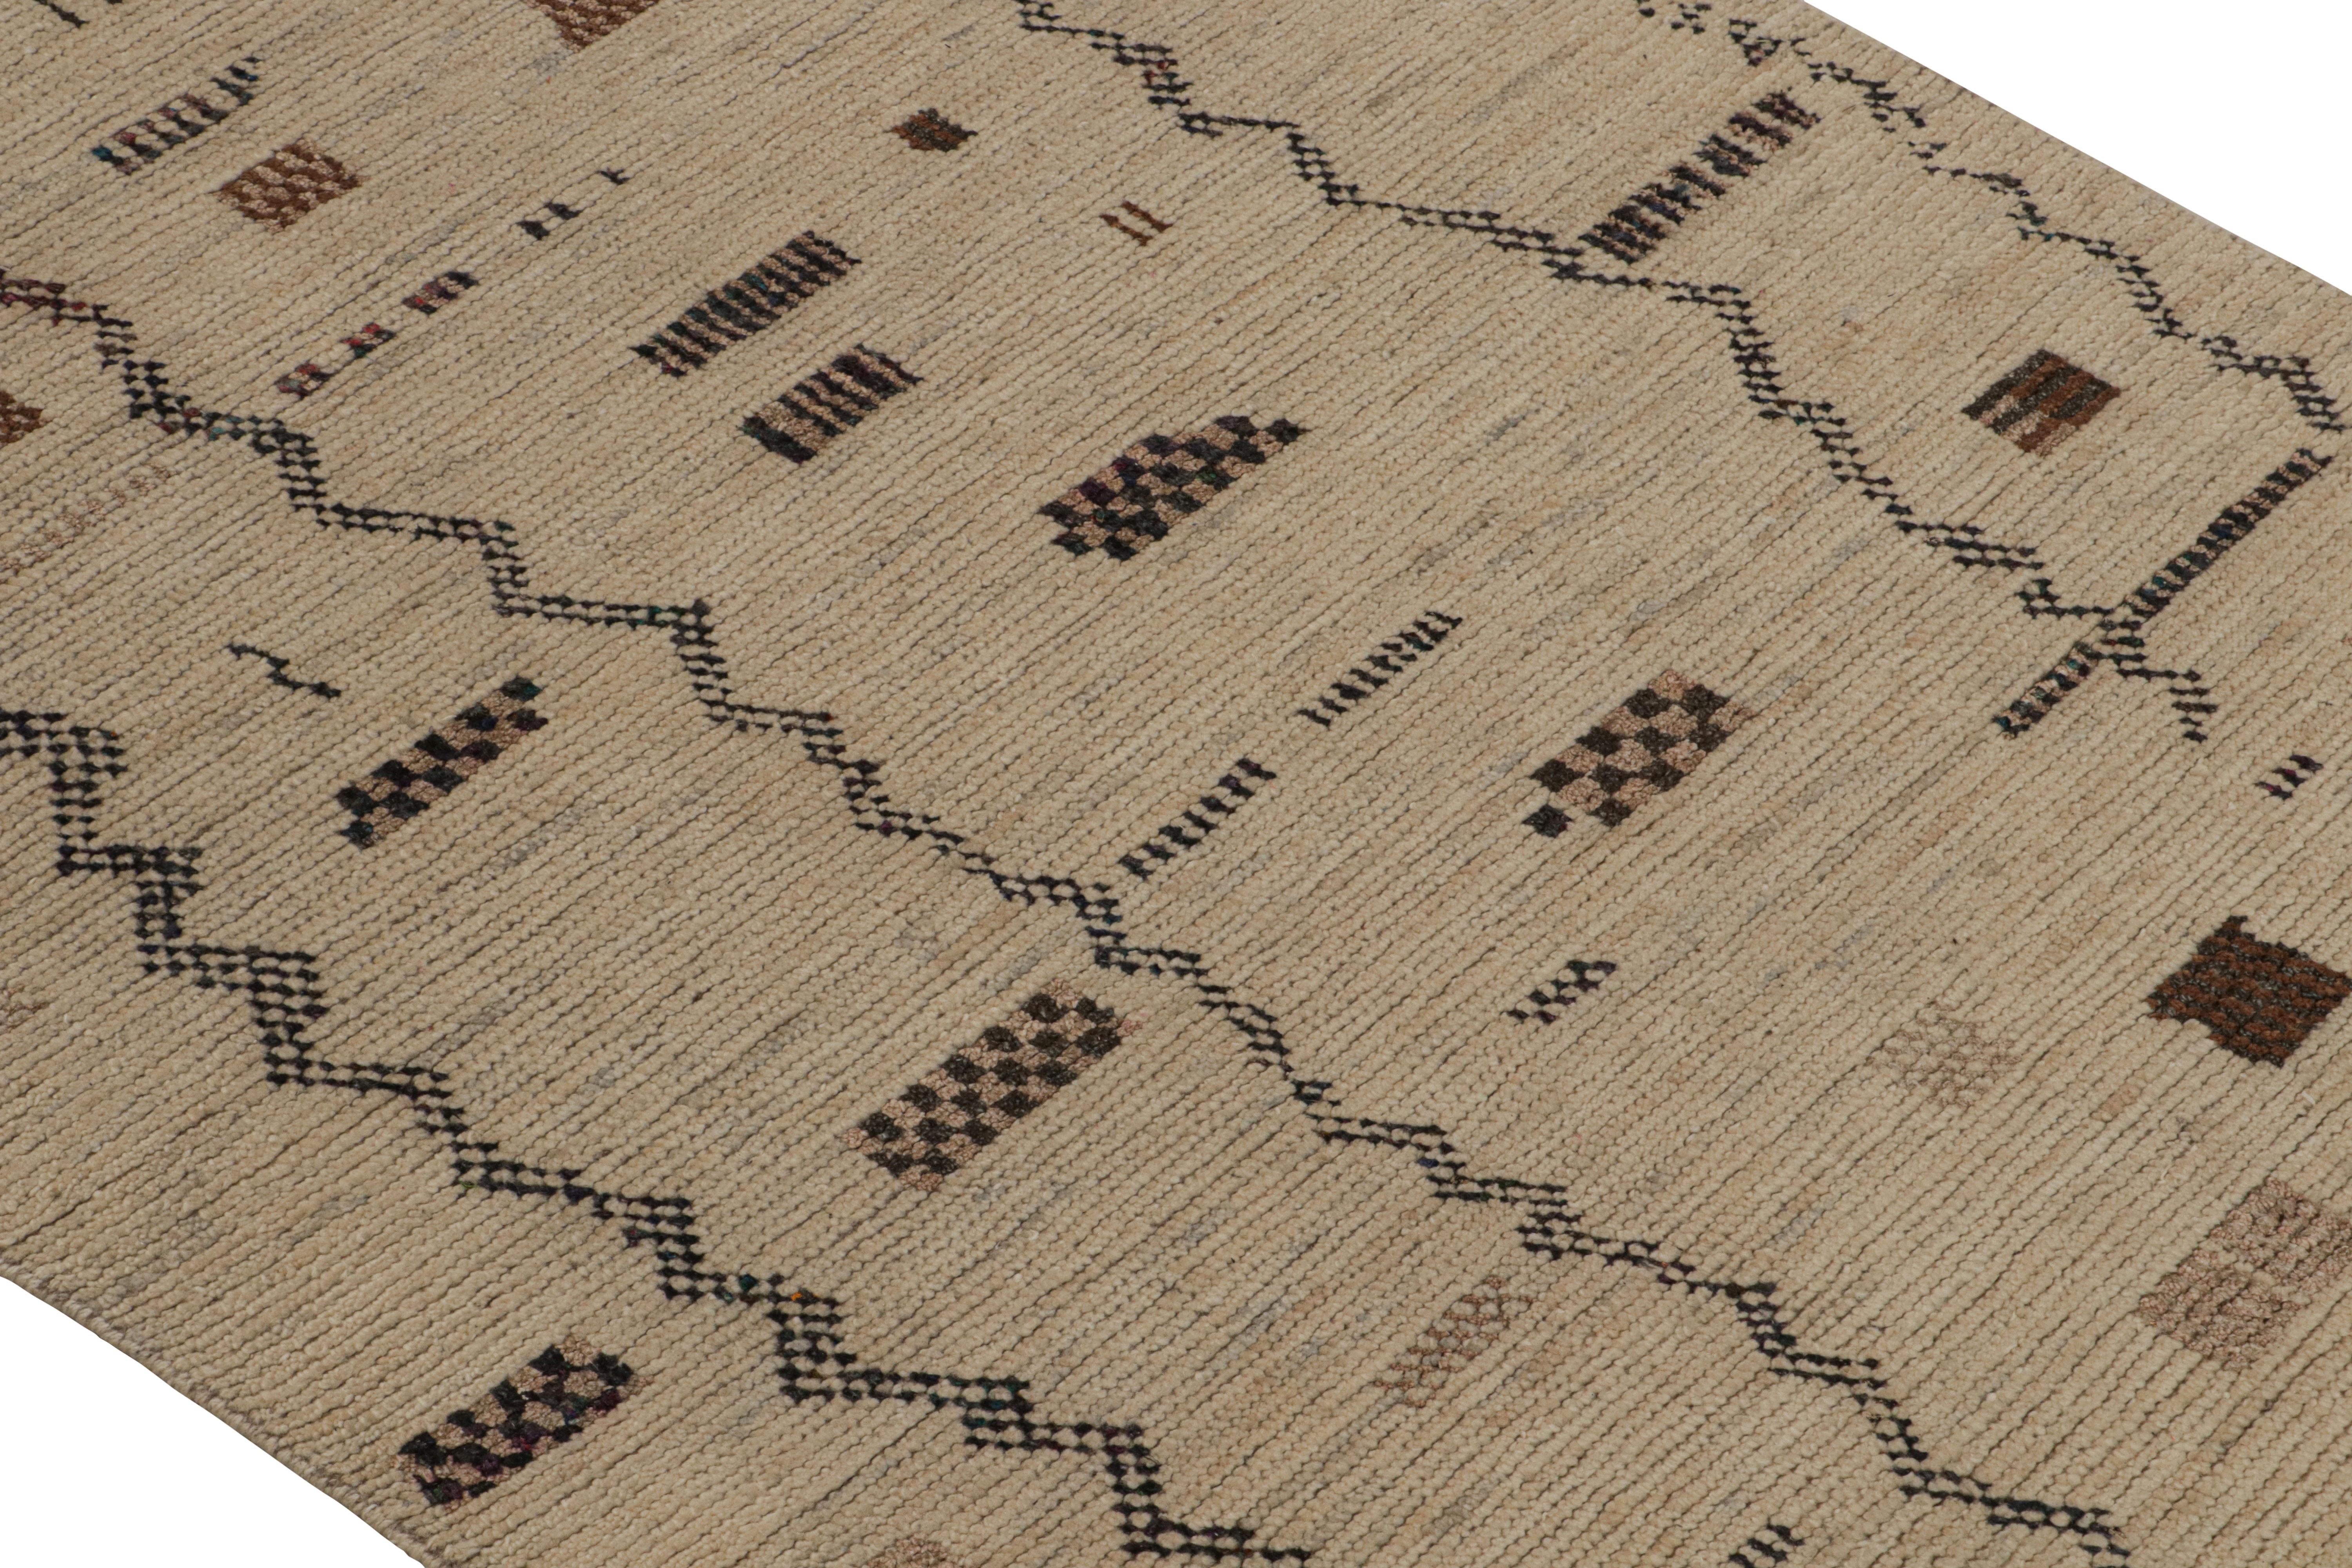 Indian Rug & Kilim’s Moroccan Style Rug in Beige-Brown and Black Geometric Pattern For Sale